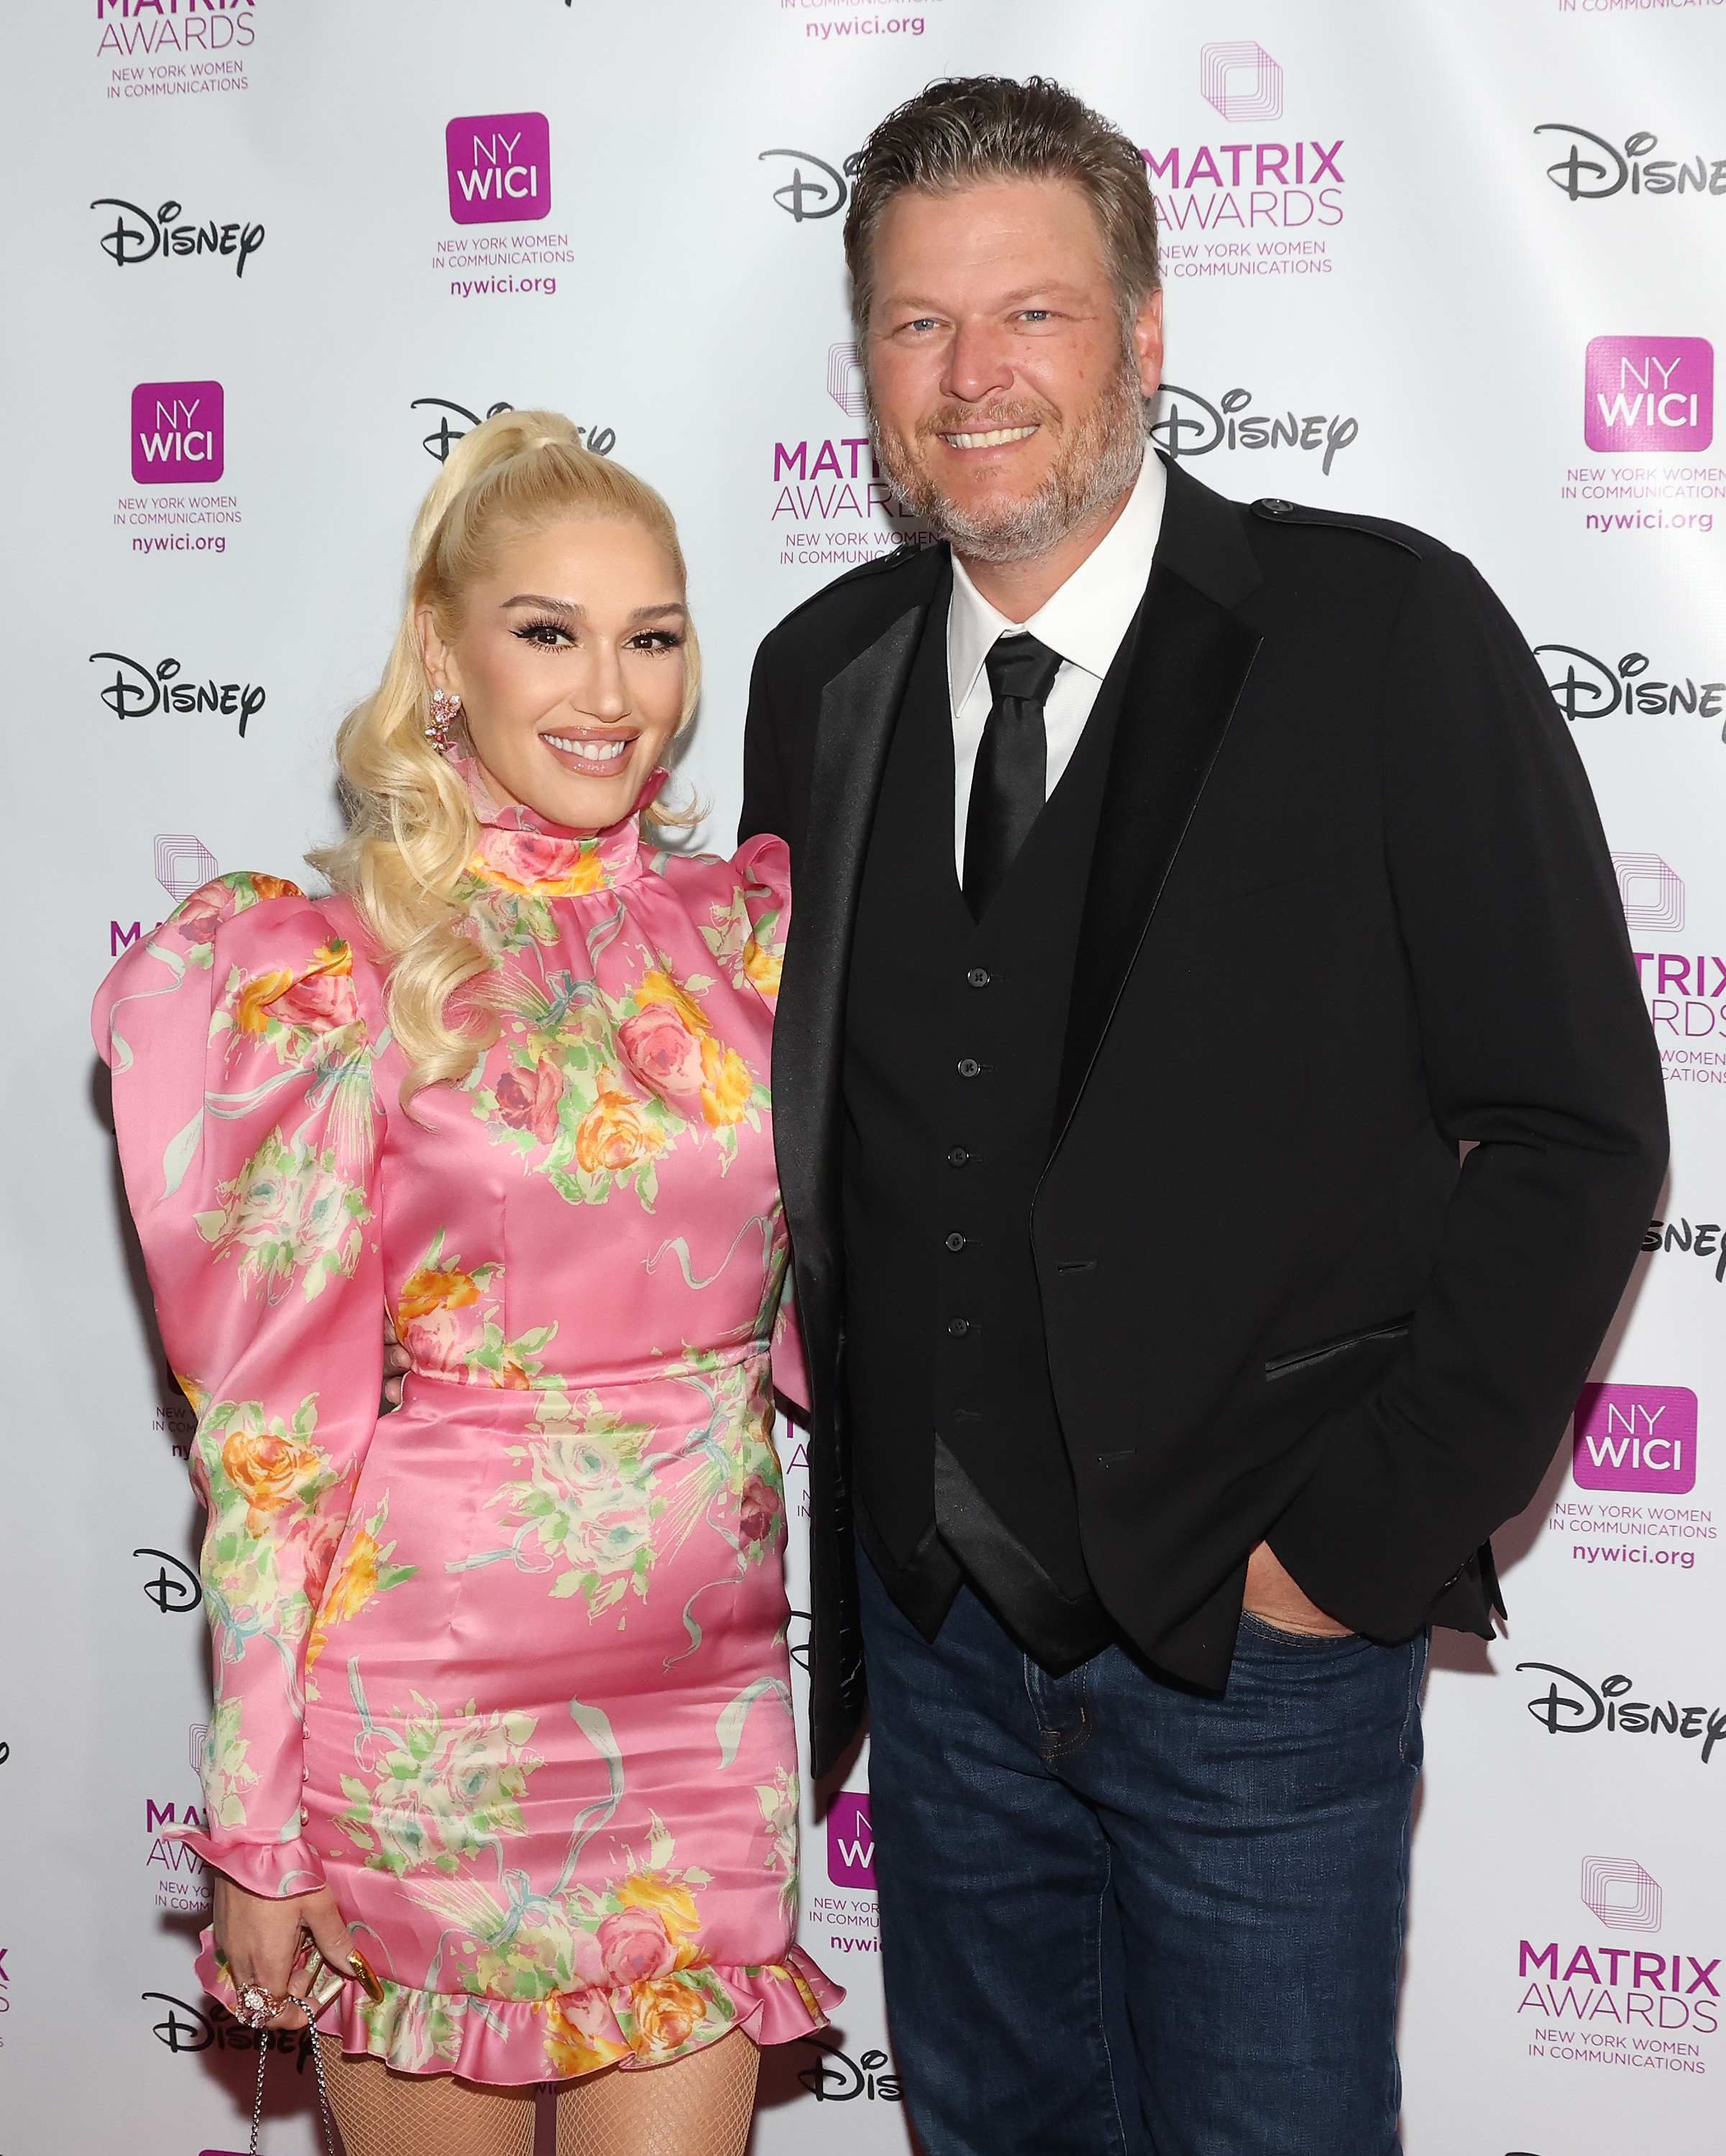 It comes amid rumors she's having marriage trouble with Blake Shelton